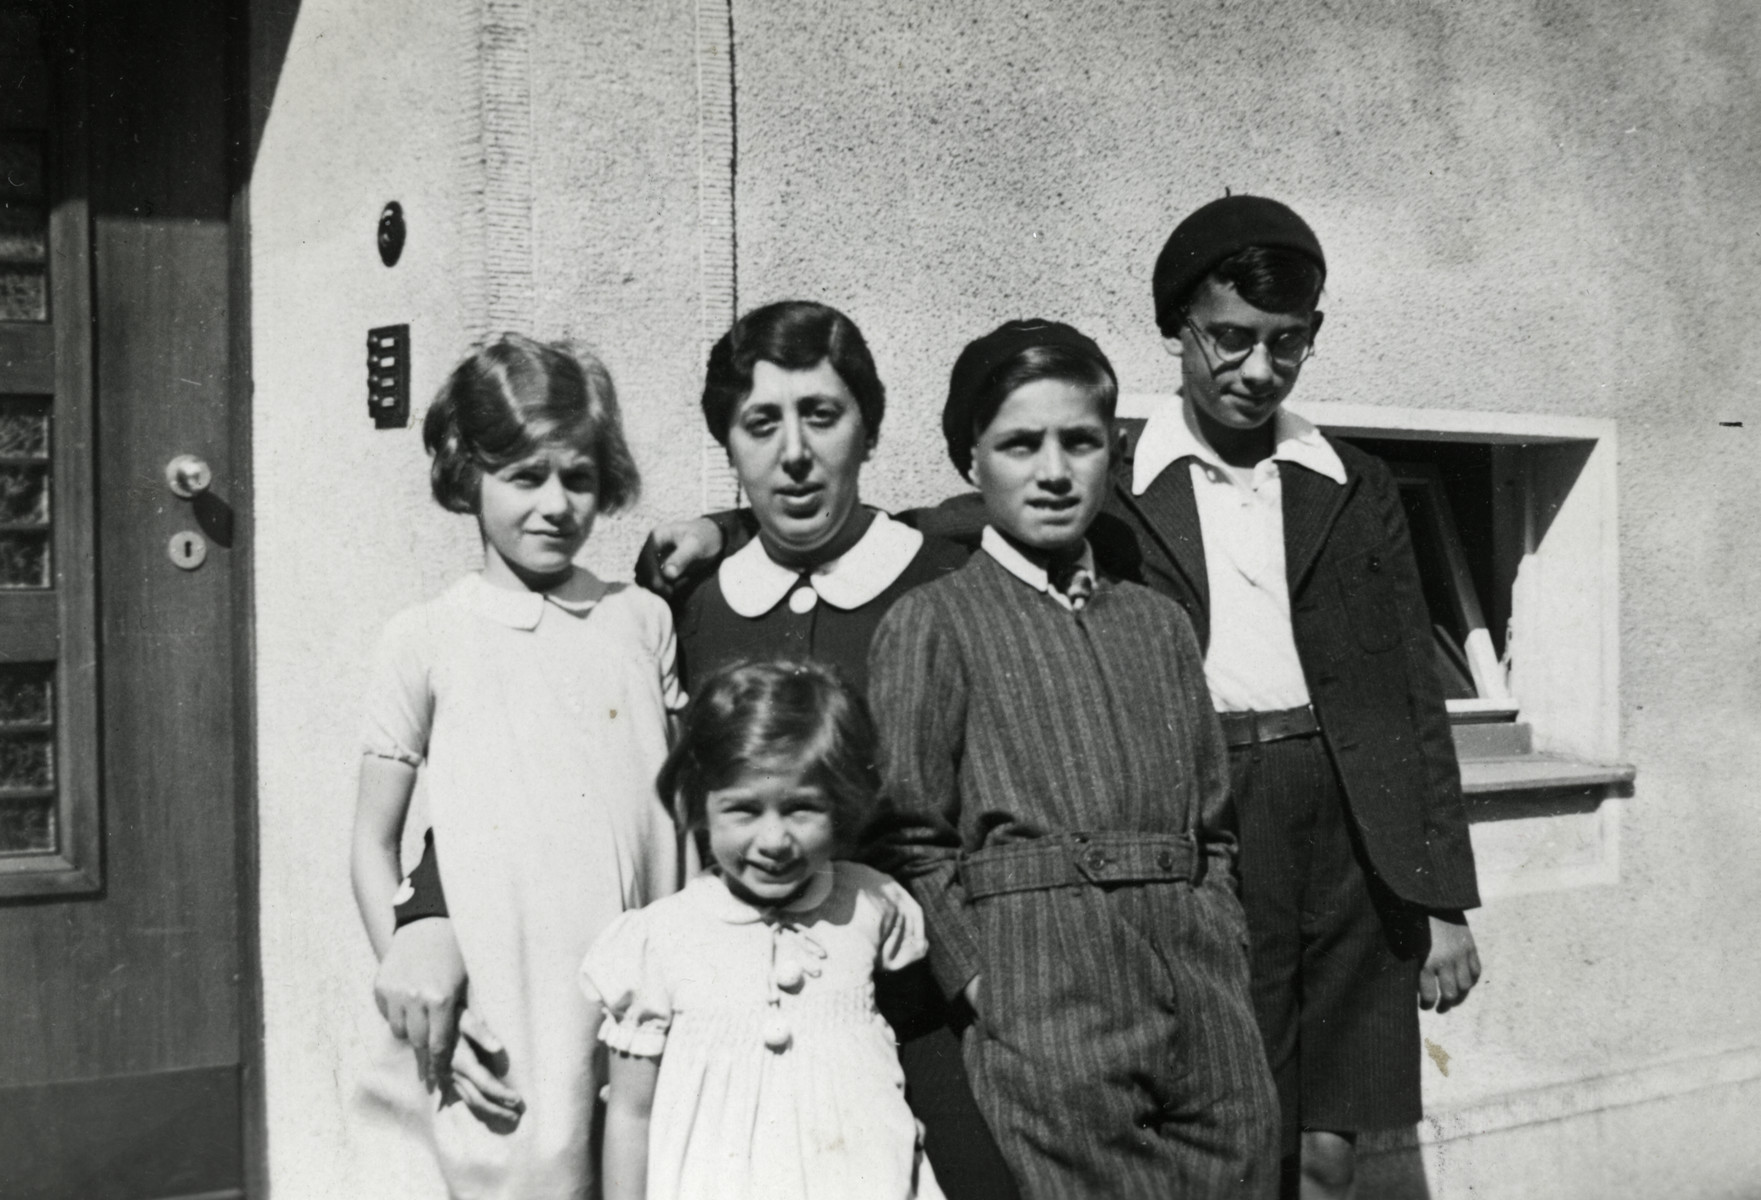 Bertha Klingman poses with four of her children Hannah, Jeannette, David, and Karl.